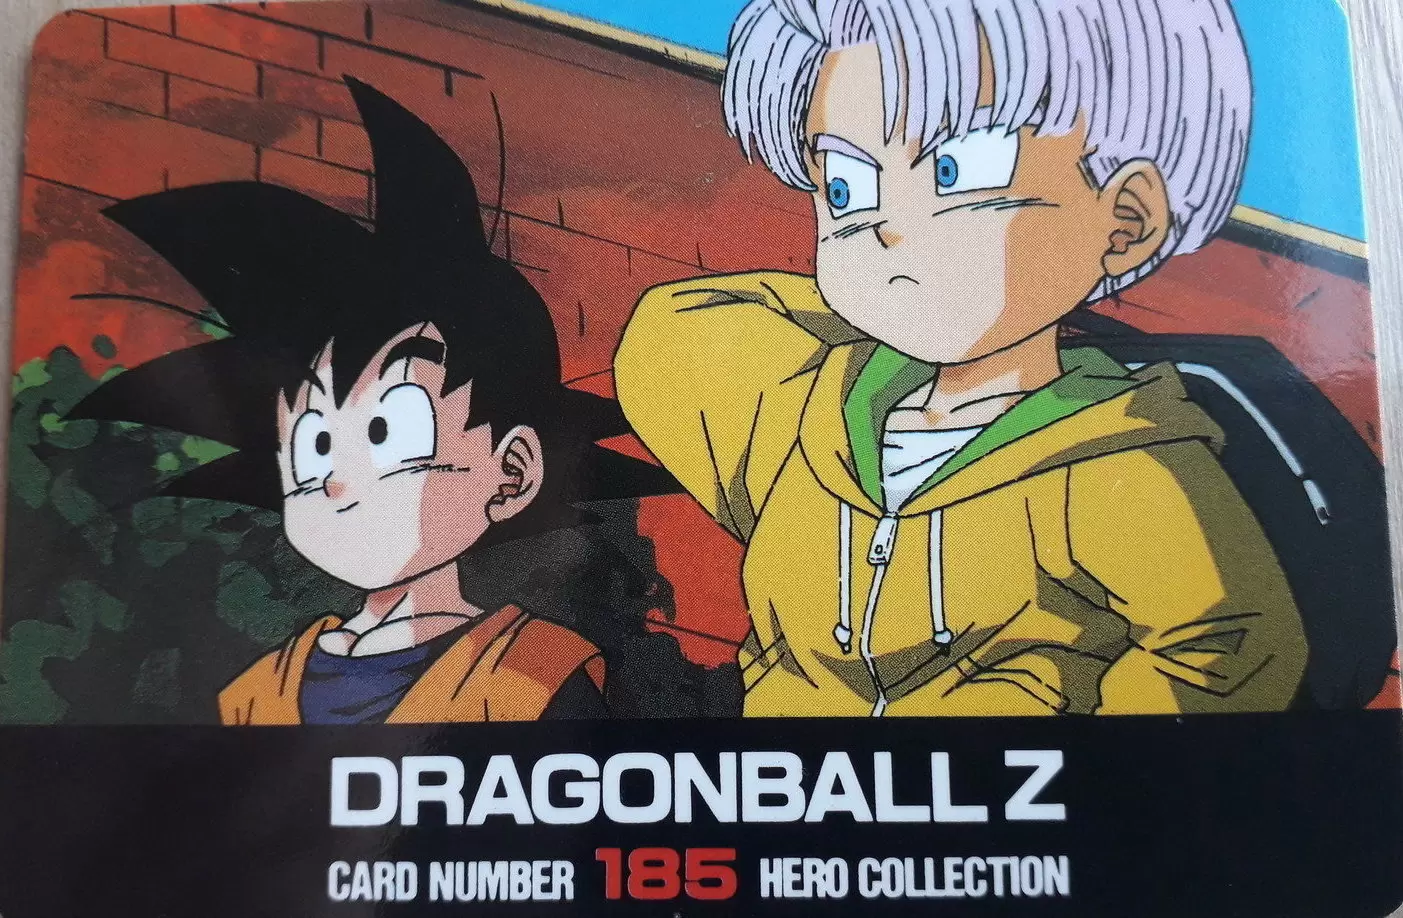 Dragon Ball Z Hero Collection Series Part 2 - Card number 185